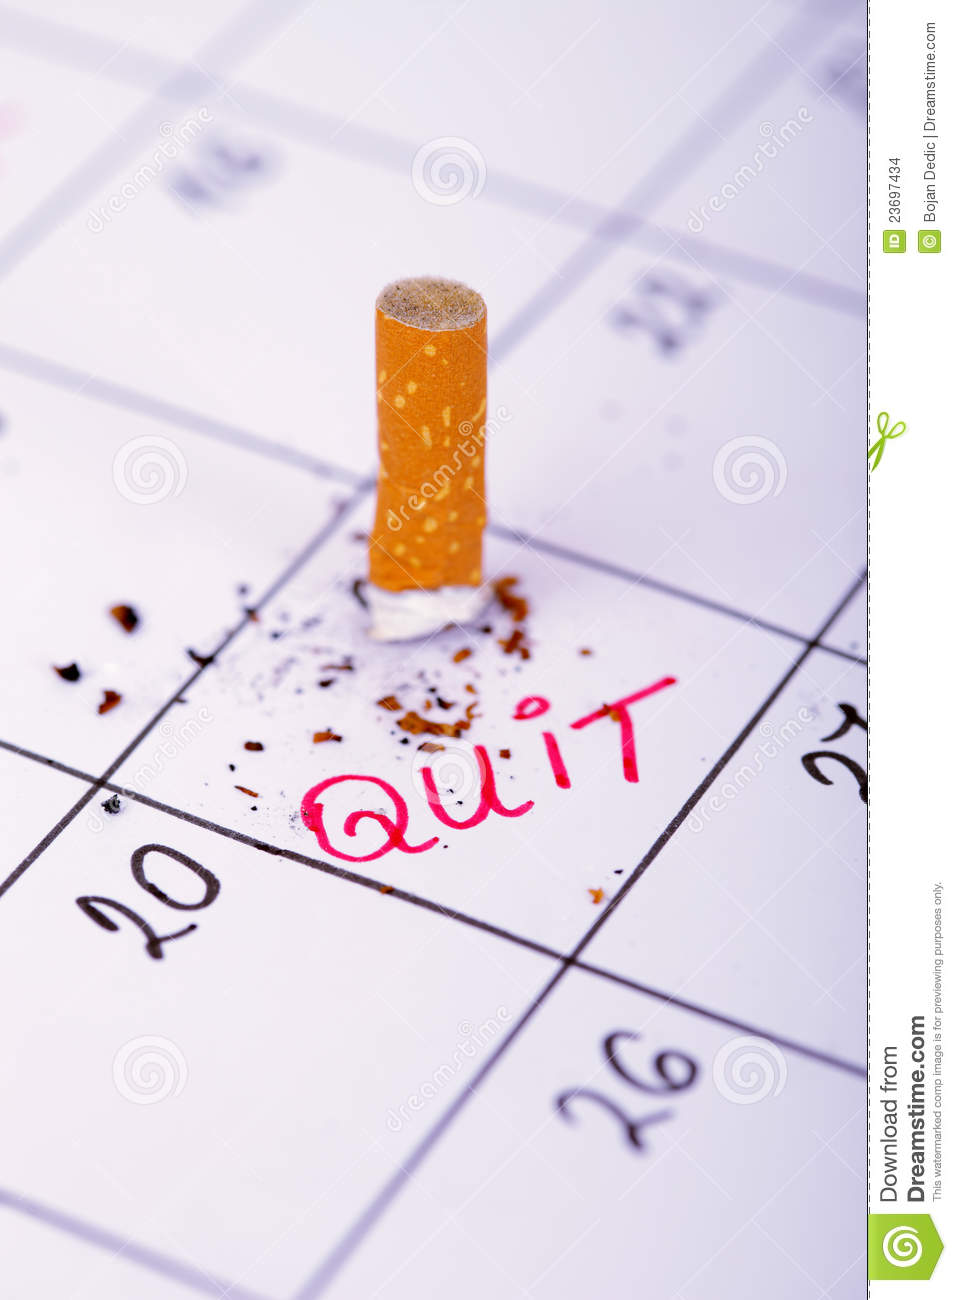 Day When I Will Quit Smoking Stock Images   Image  23697434